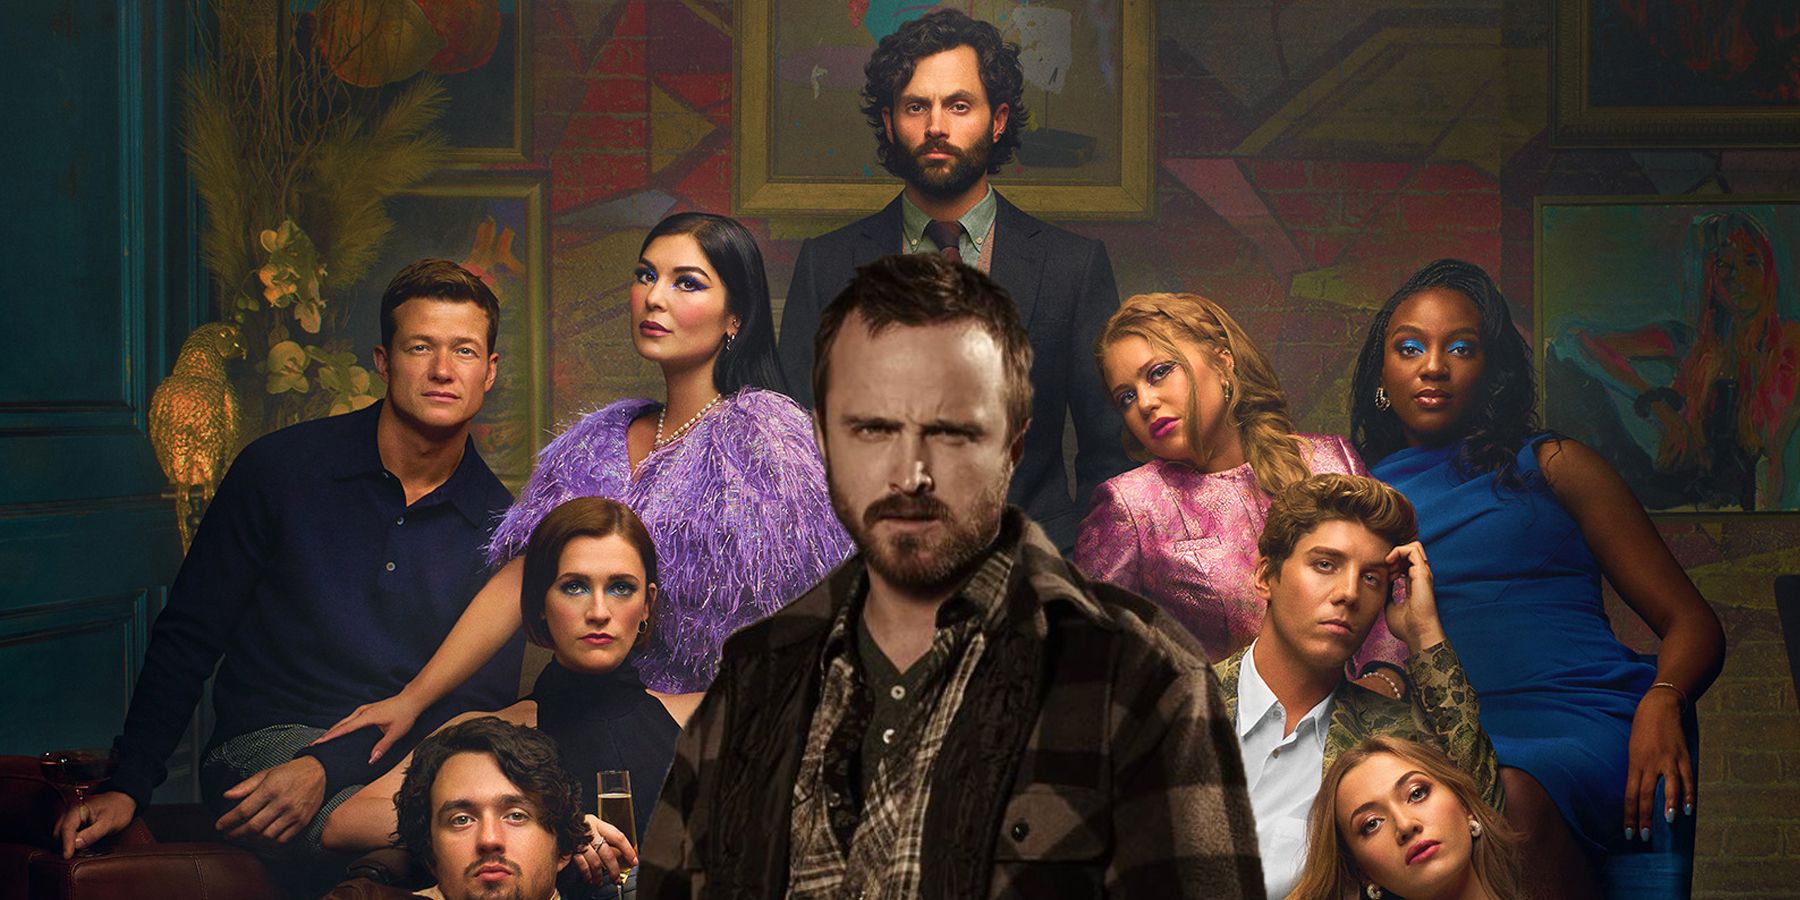 Breaking Bad's Jesse Pinkman Almost Played By You Star Penn Badgley